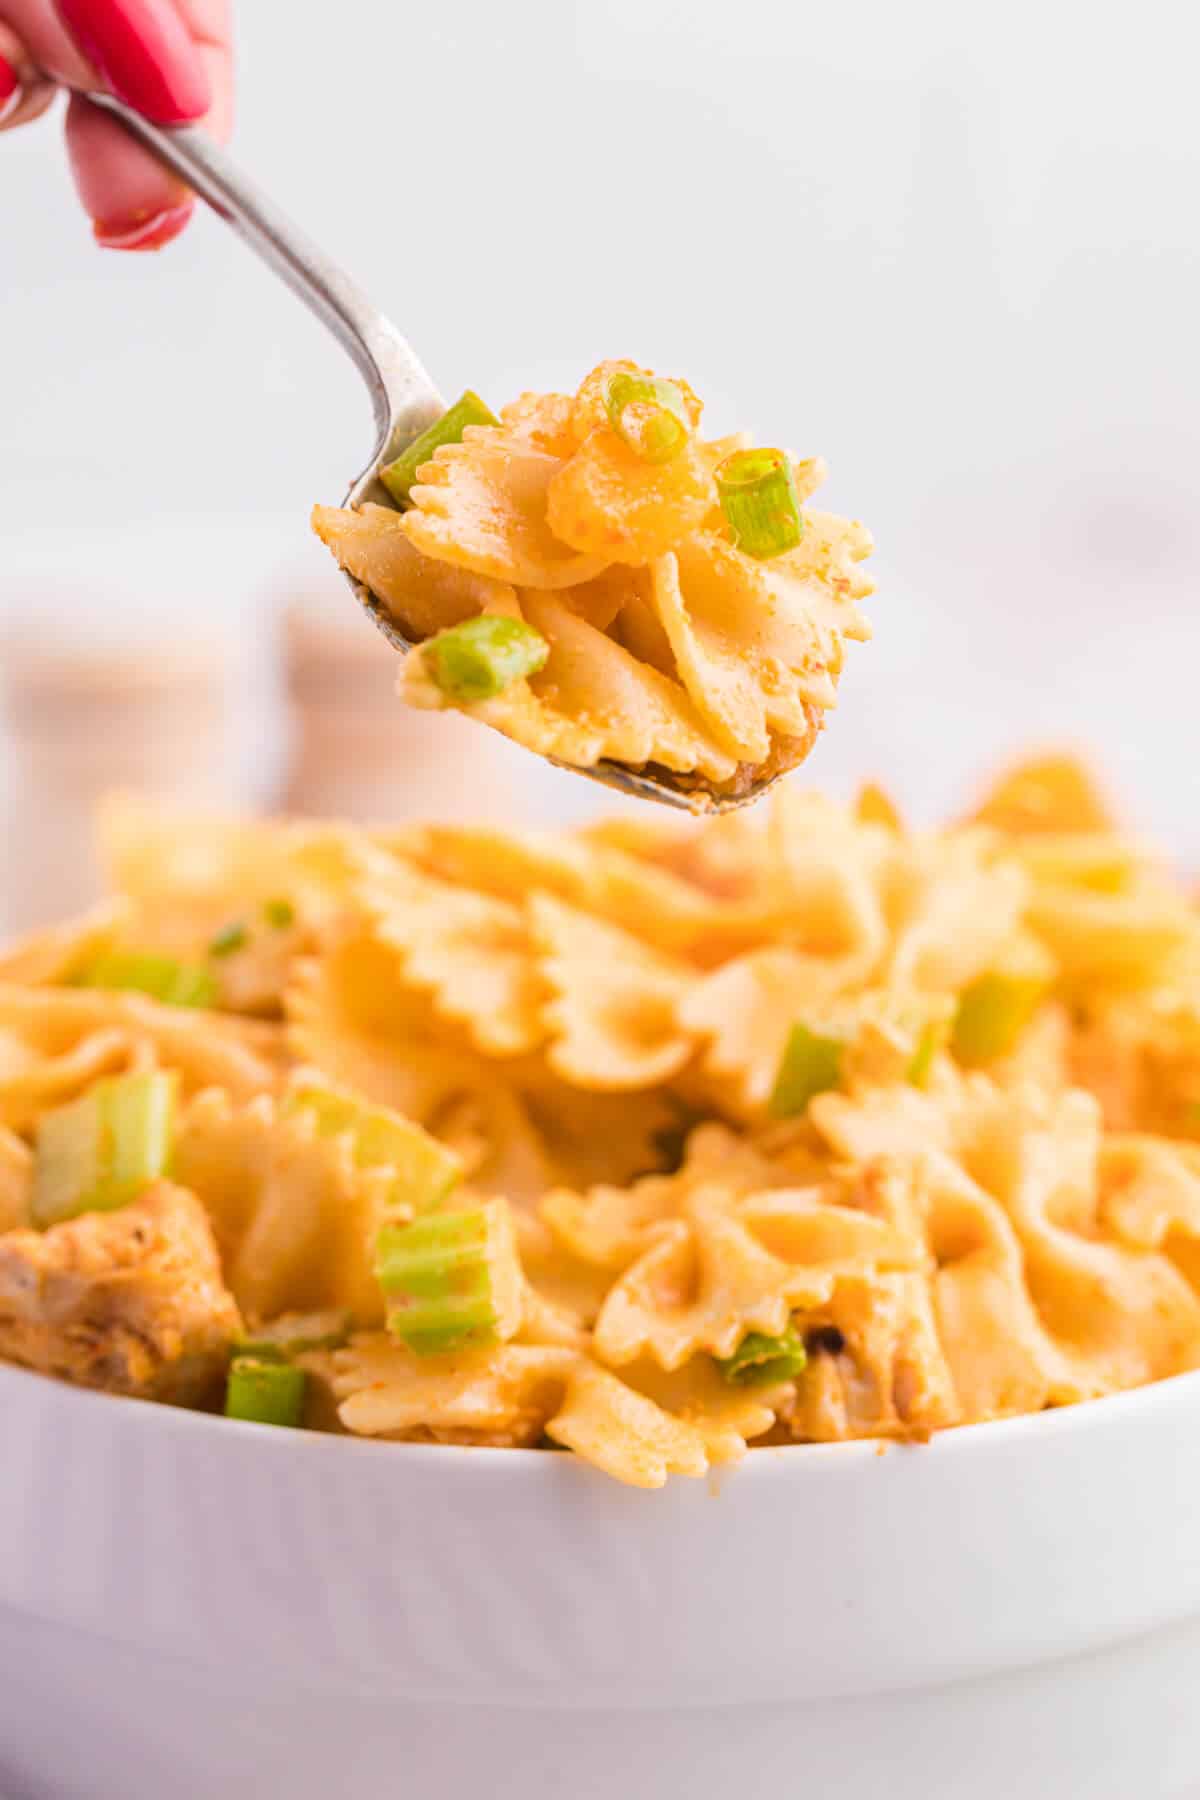 A spoon of creamy curried chicken pasta salad.